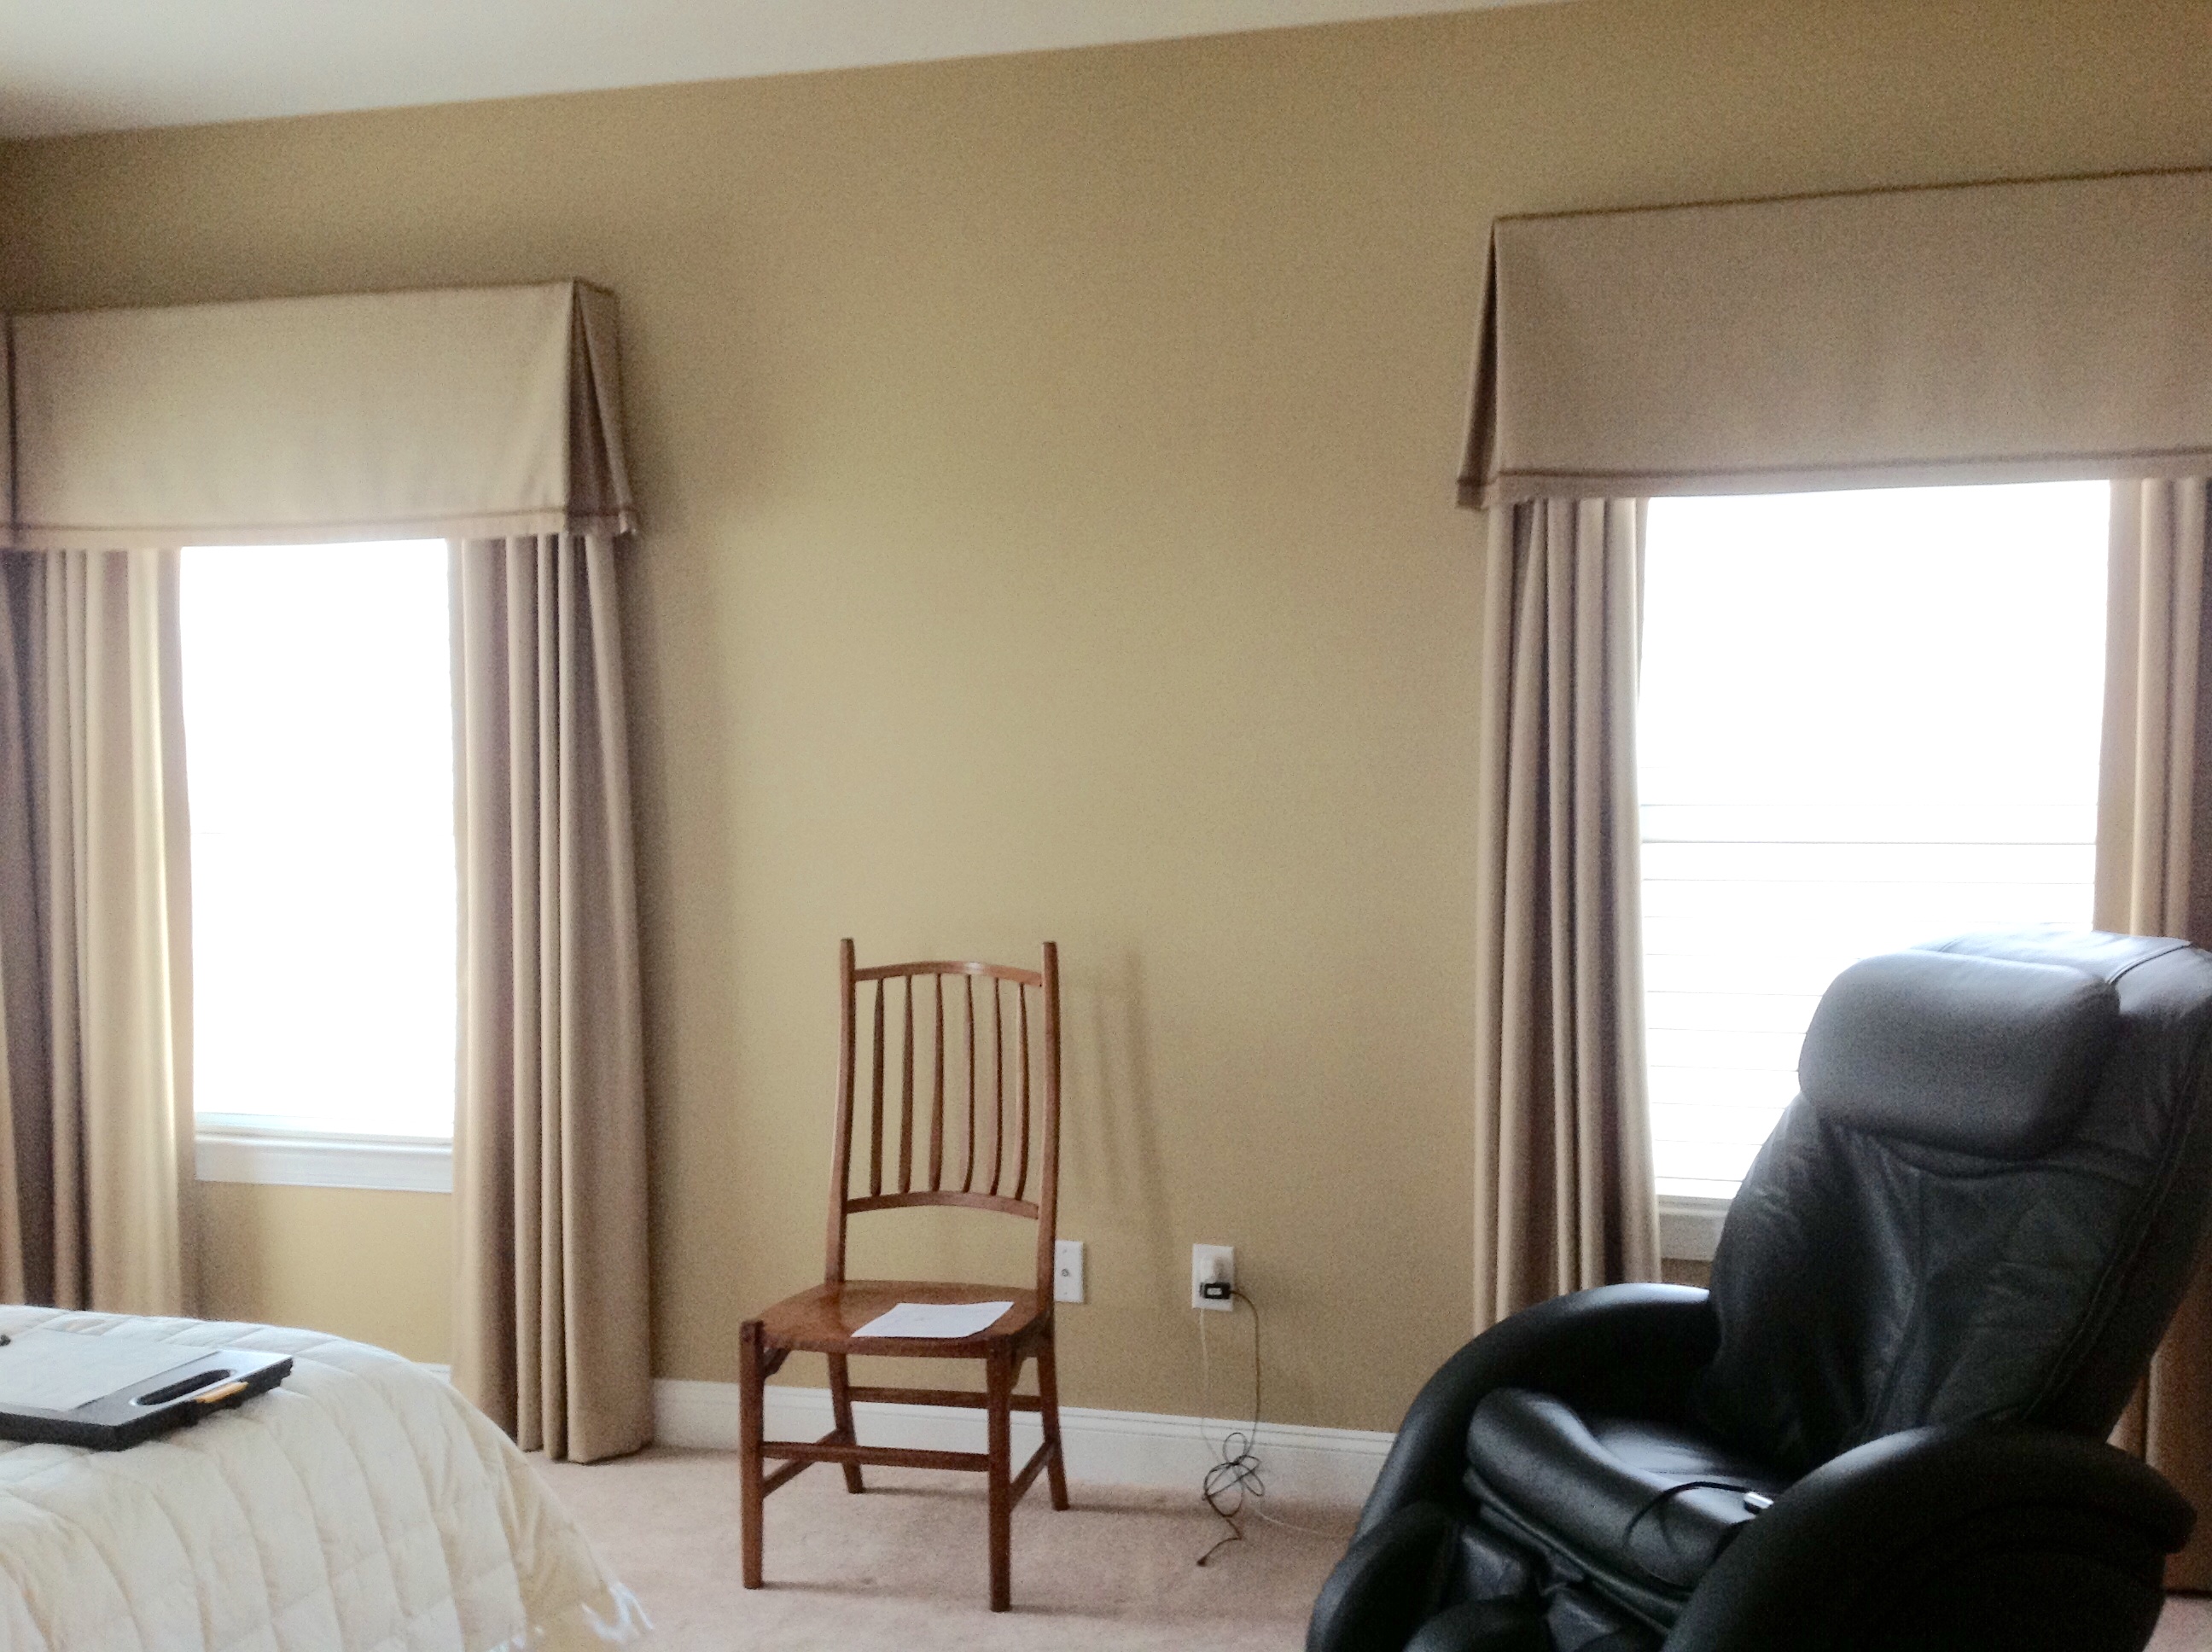 Box pleat valance installed over stationary panels for master bedroom